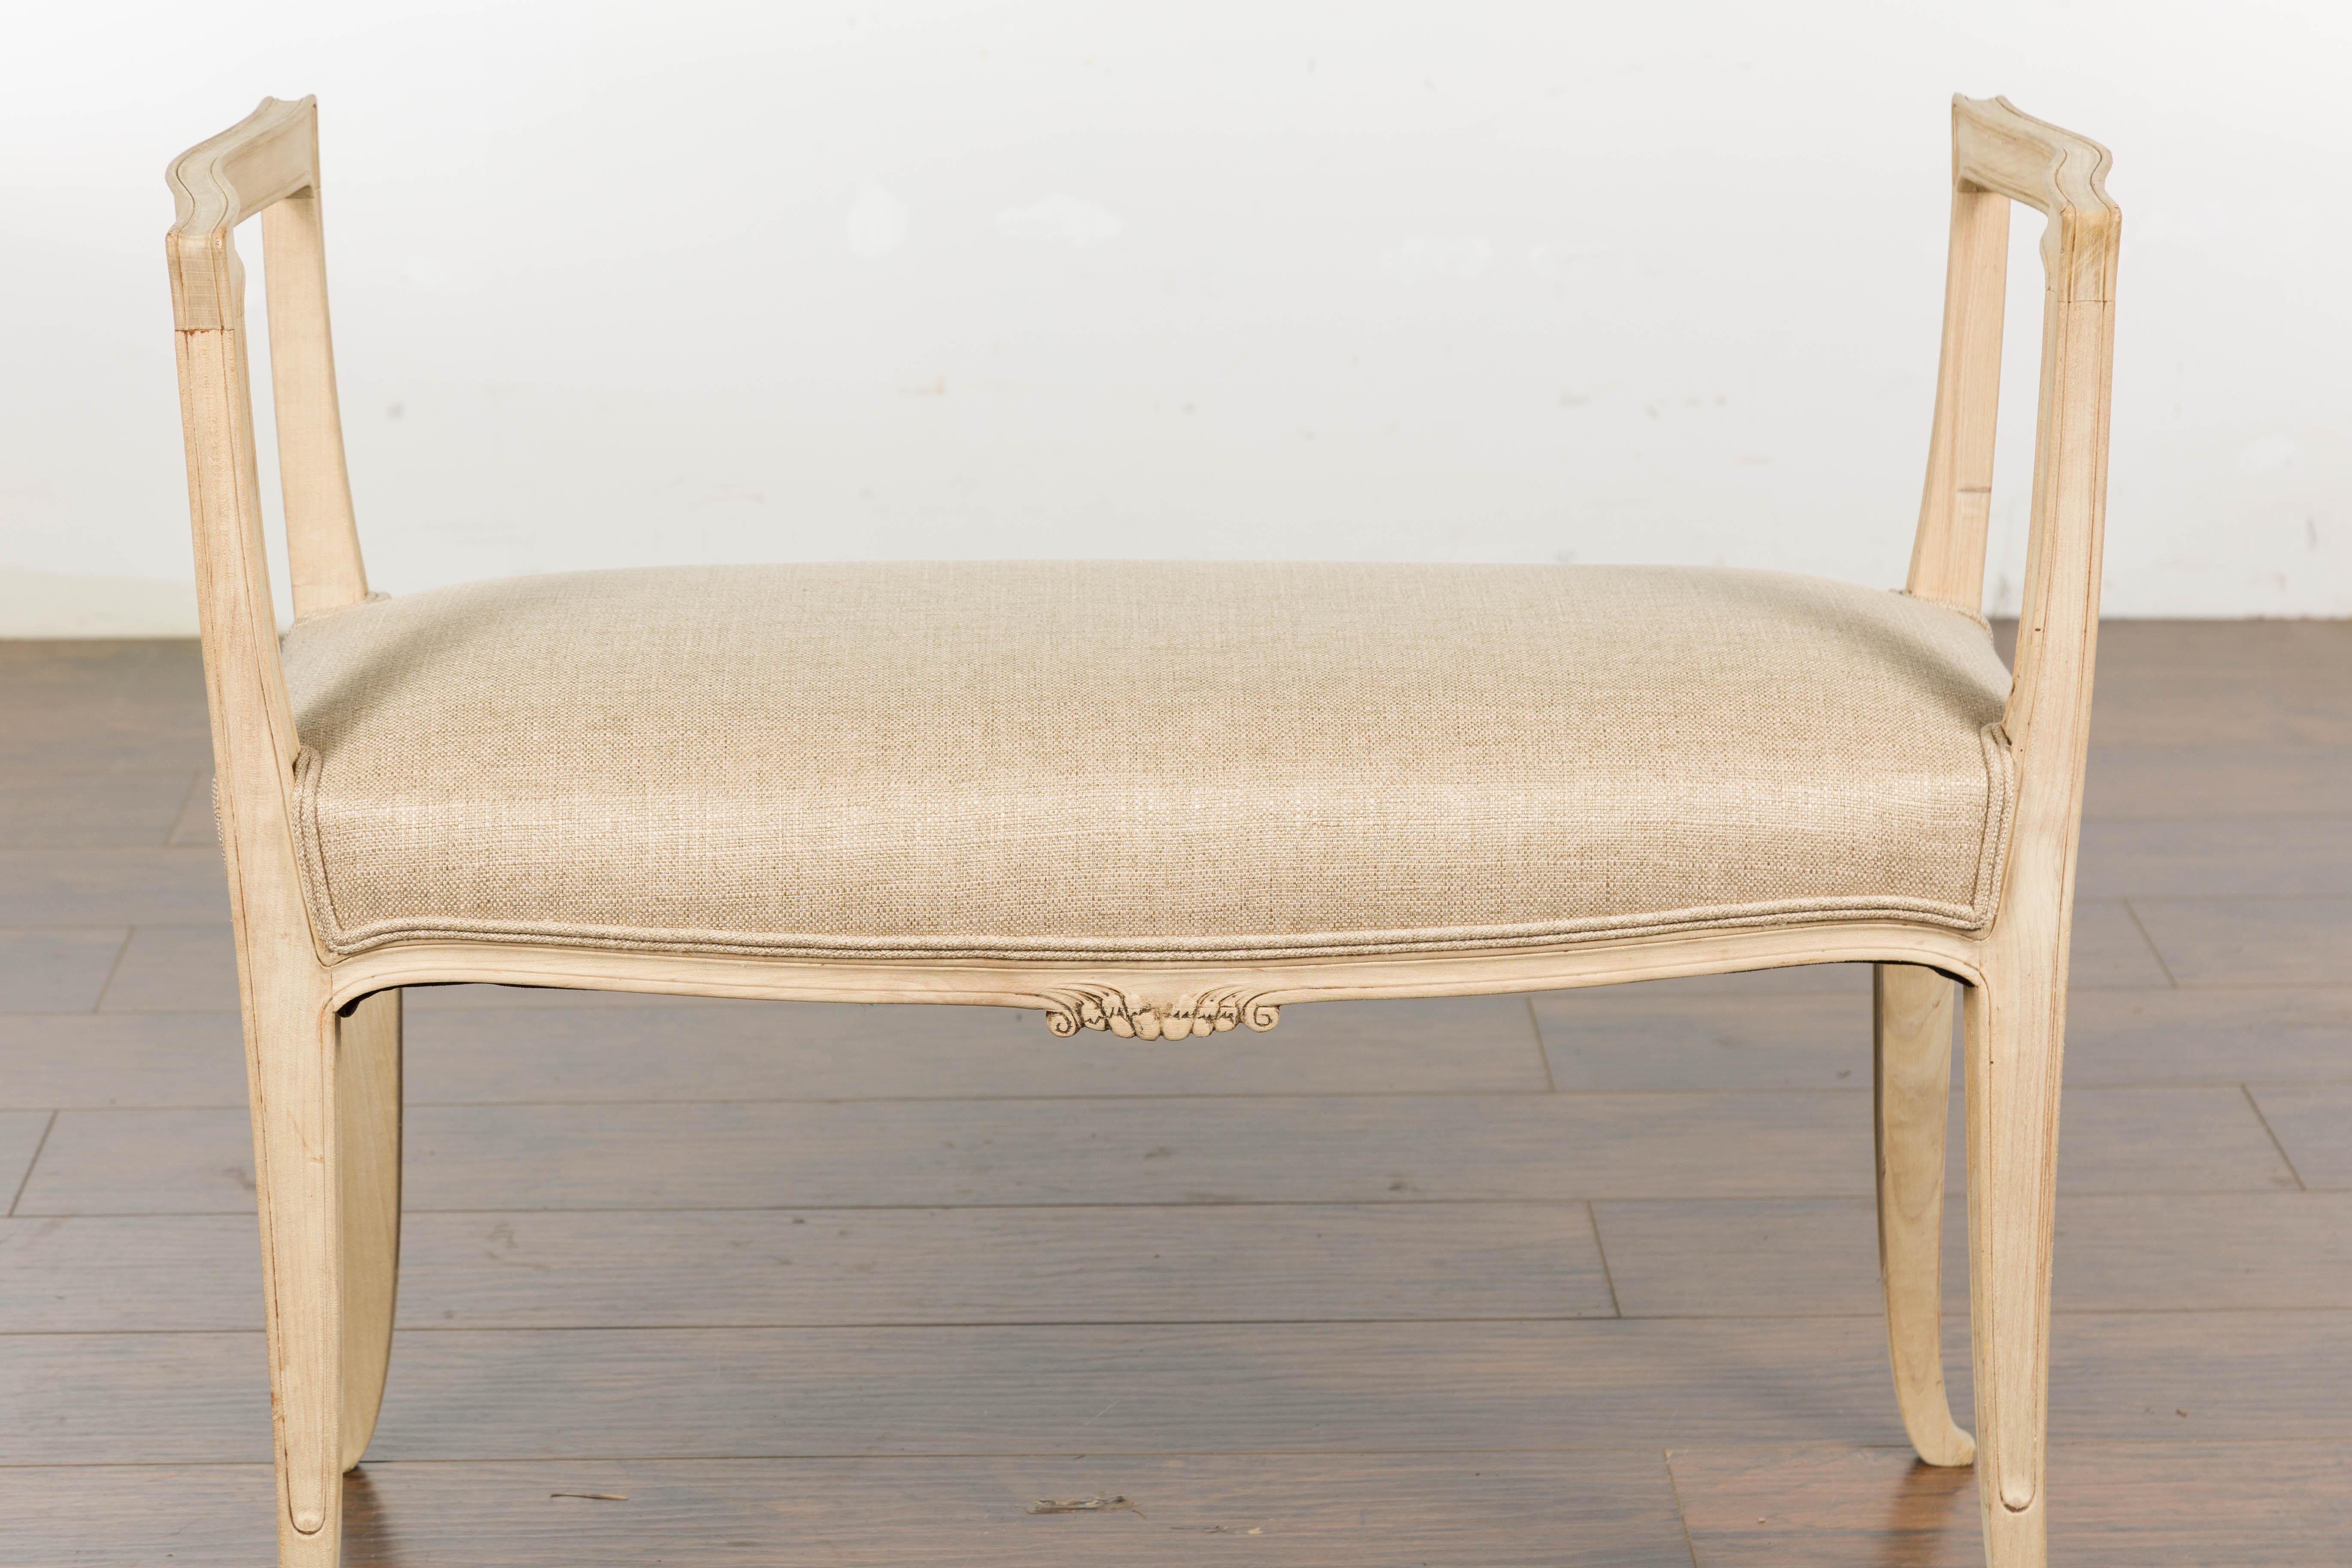 1920s French Carved Walnut Upholstered Bench with Natural Finish In Good Condition For Sale In Atlanta, GA